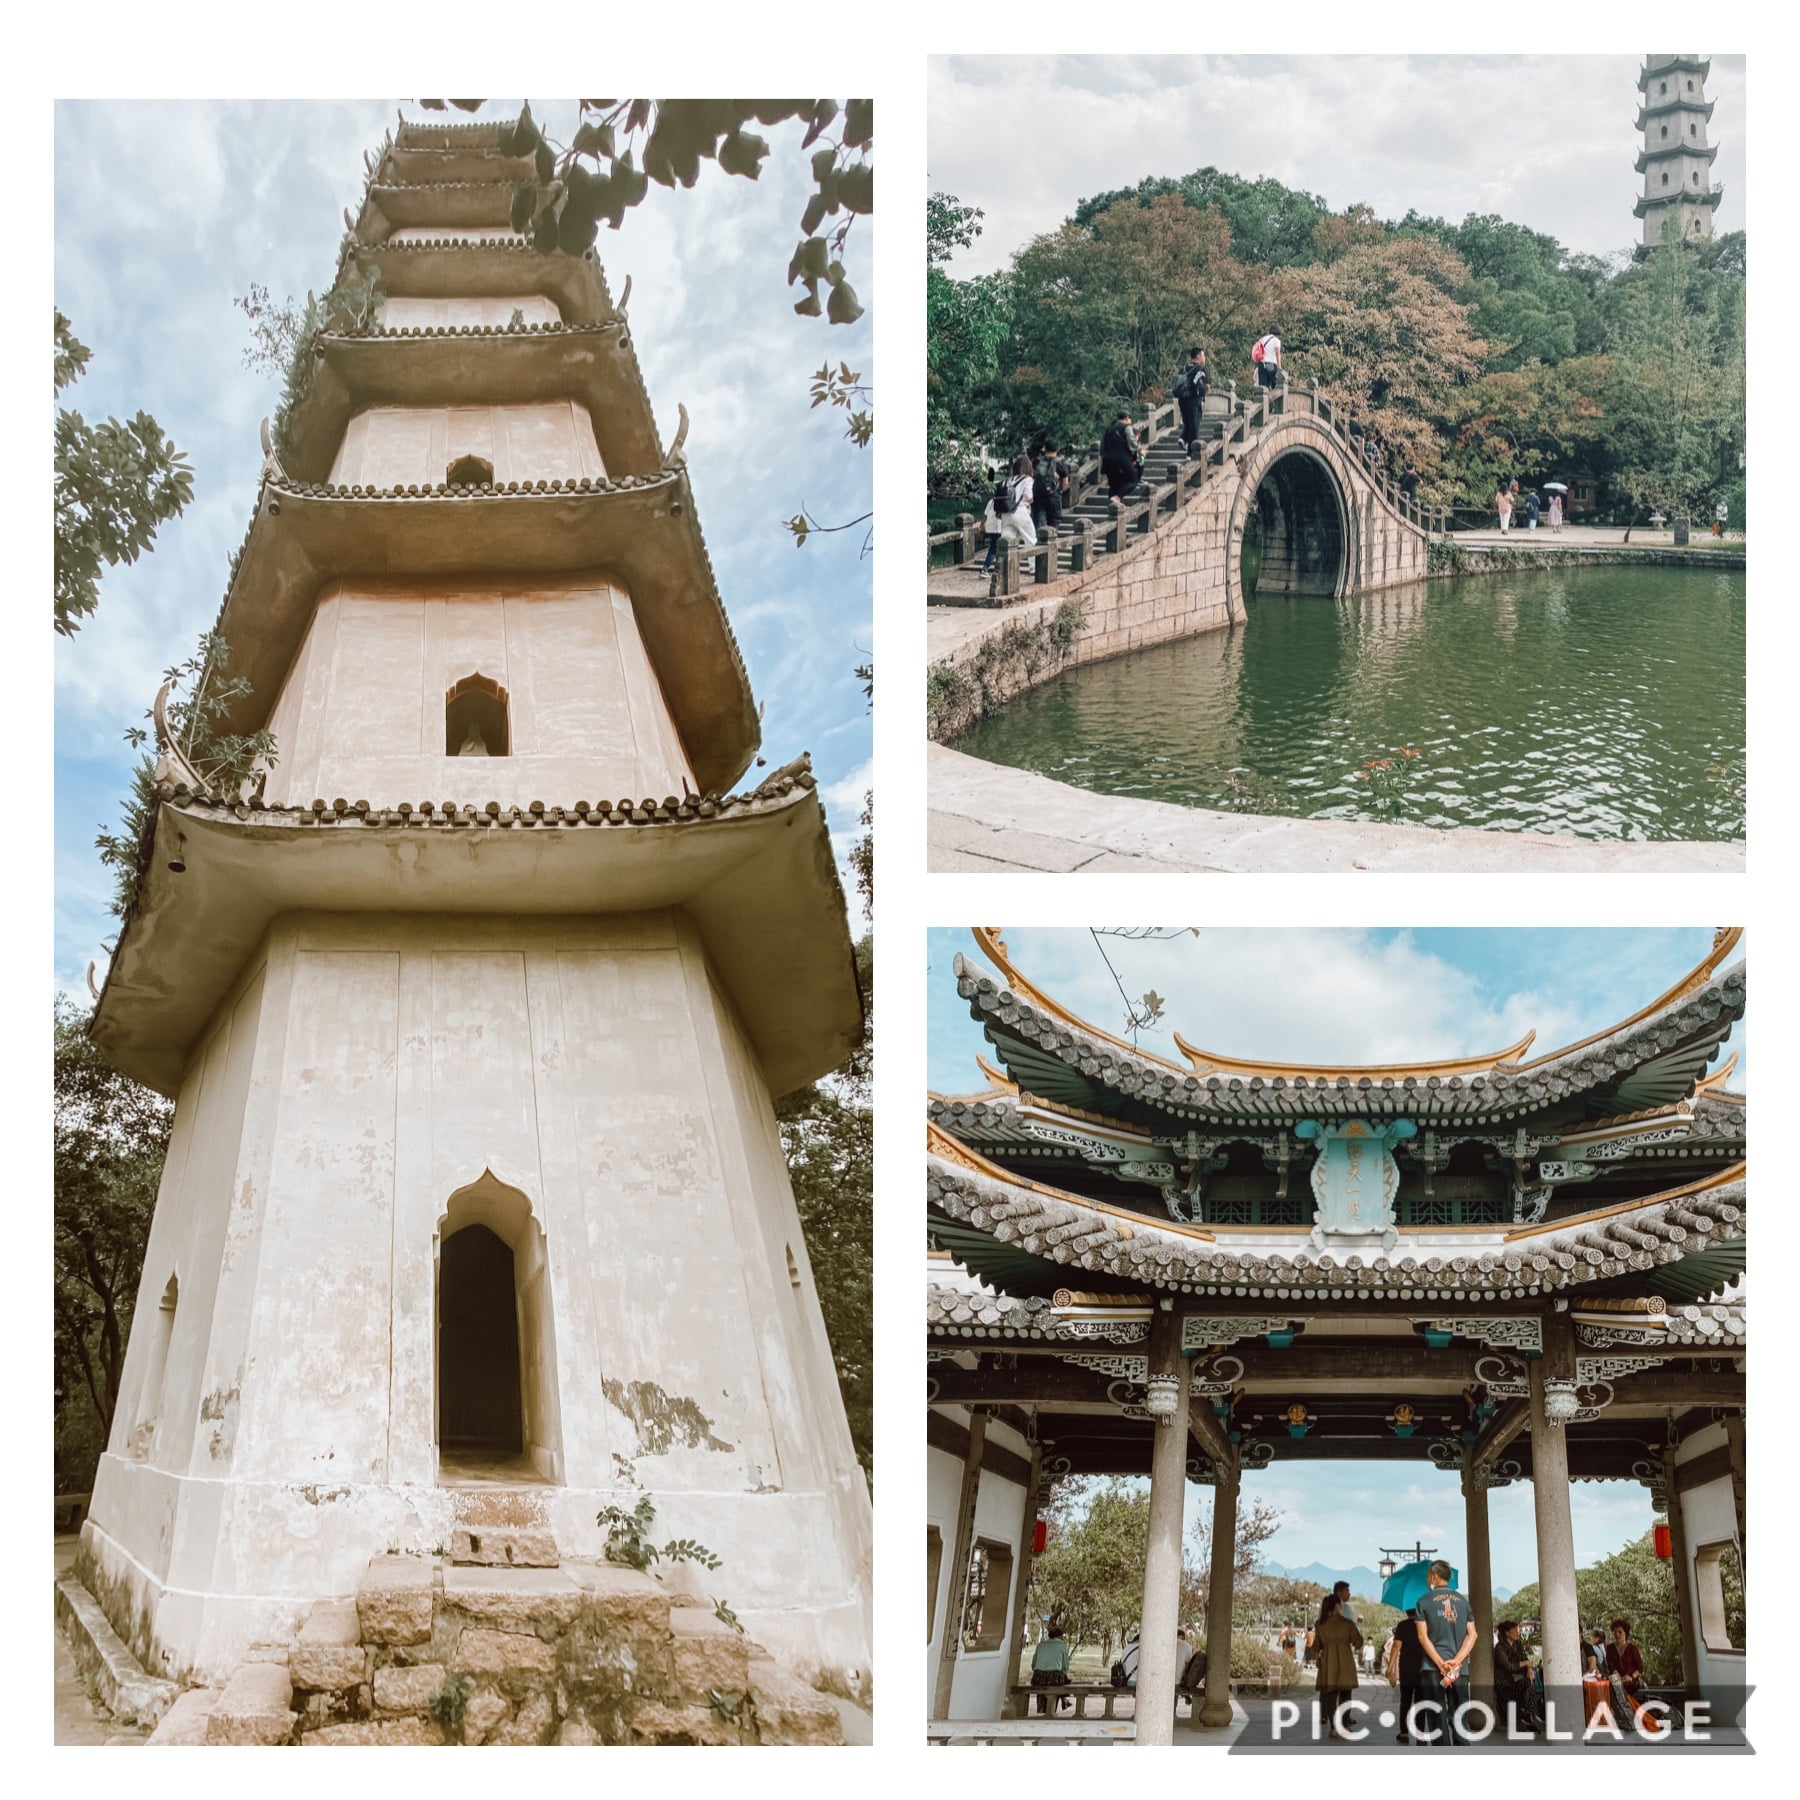 Wenzhou, Zhejiang Province – What can you actually do there?